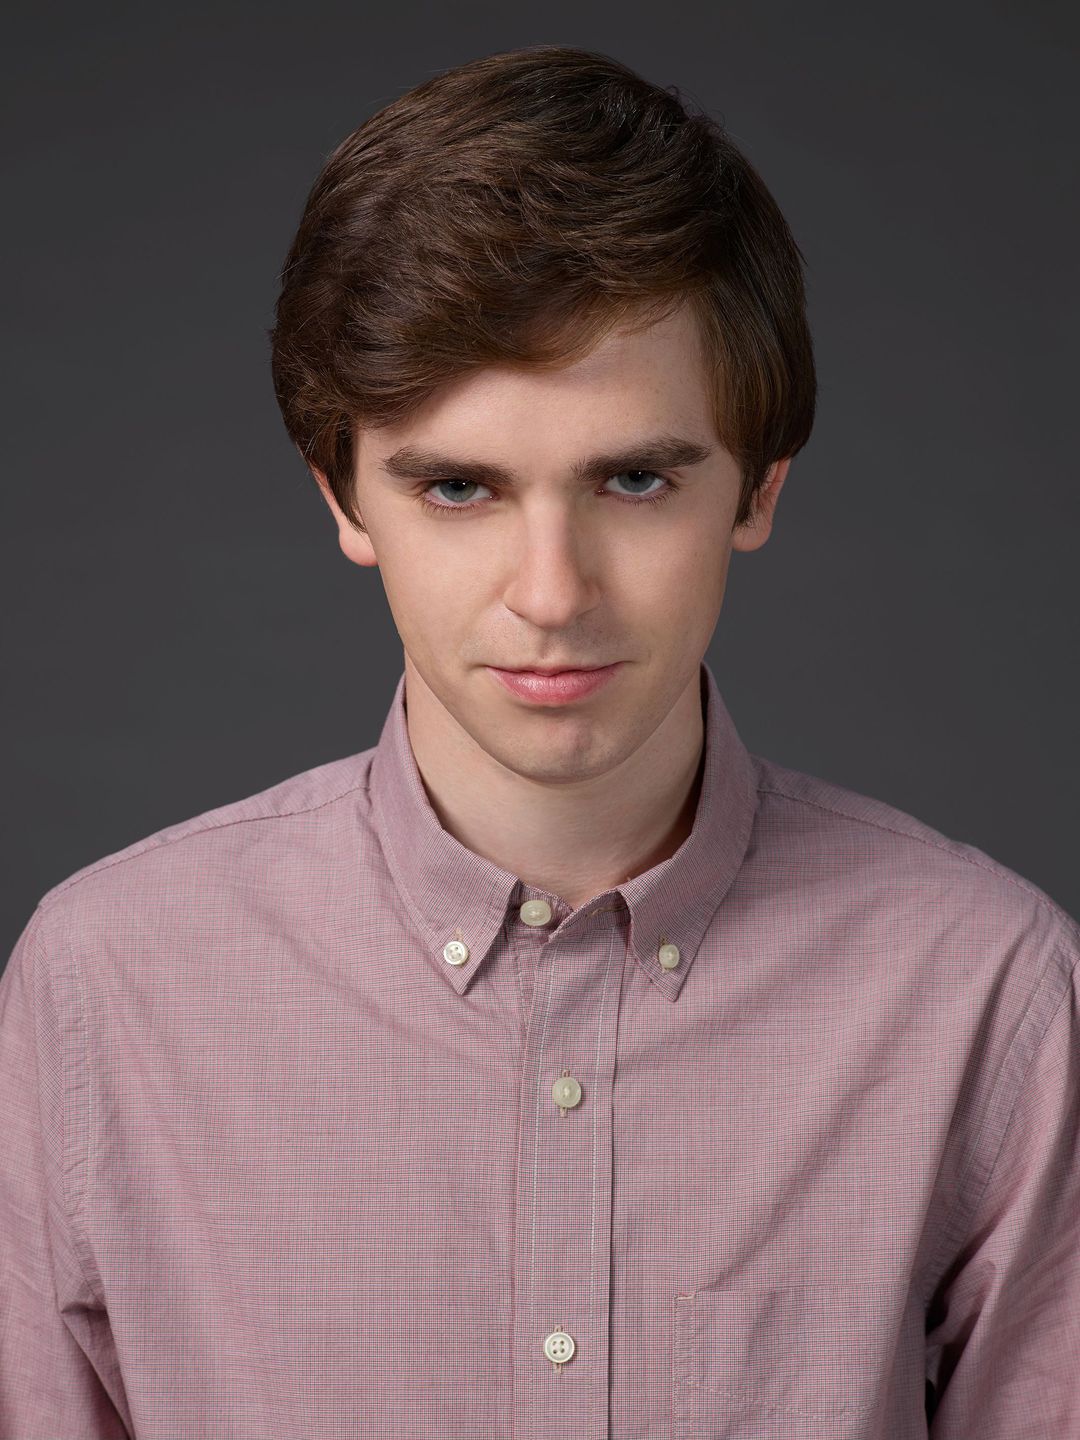 Freddie Highmore does he have a wife